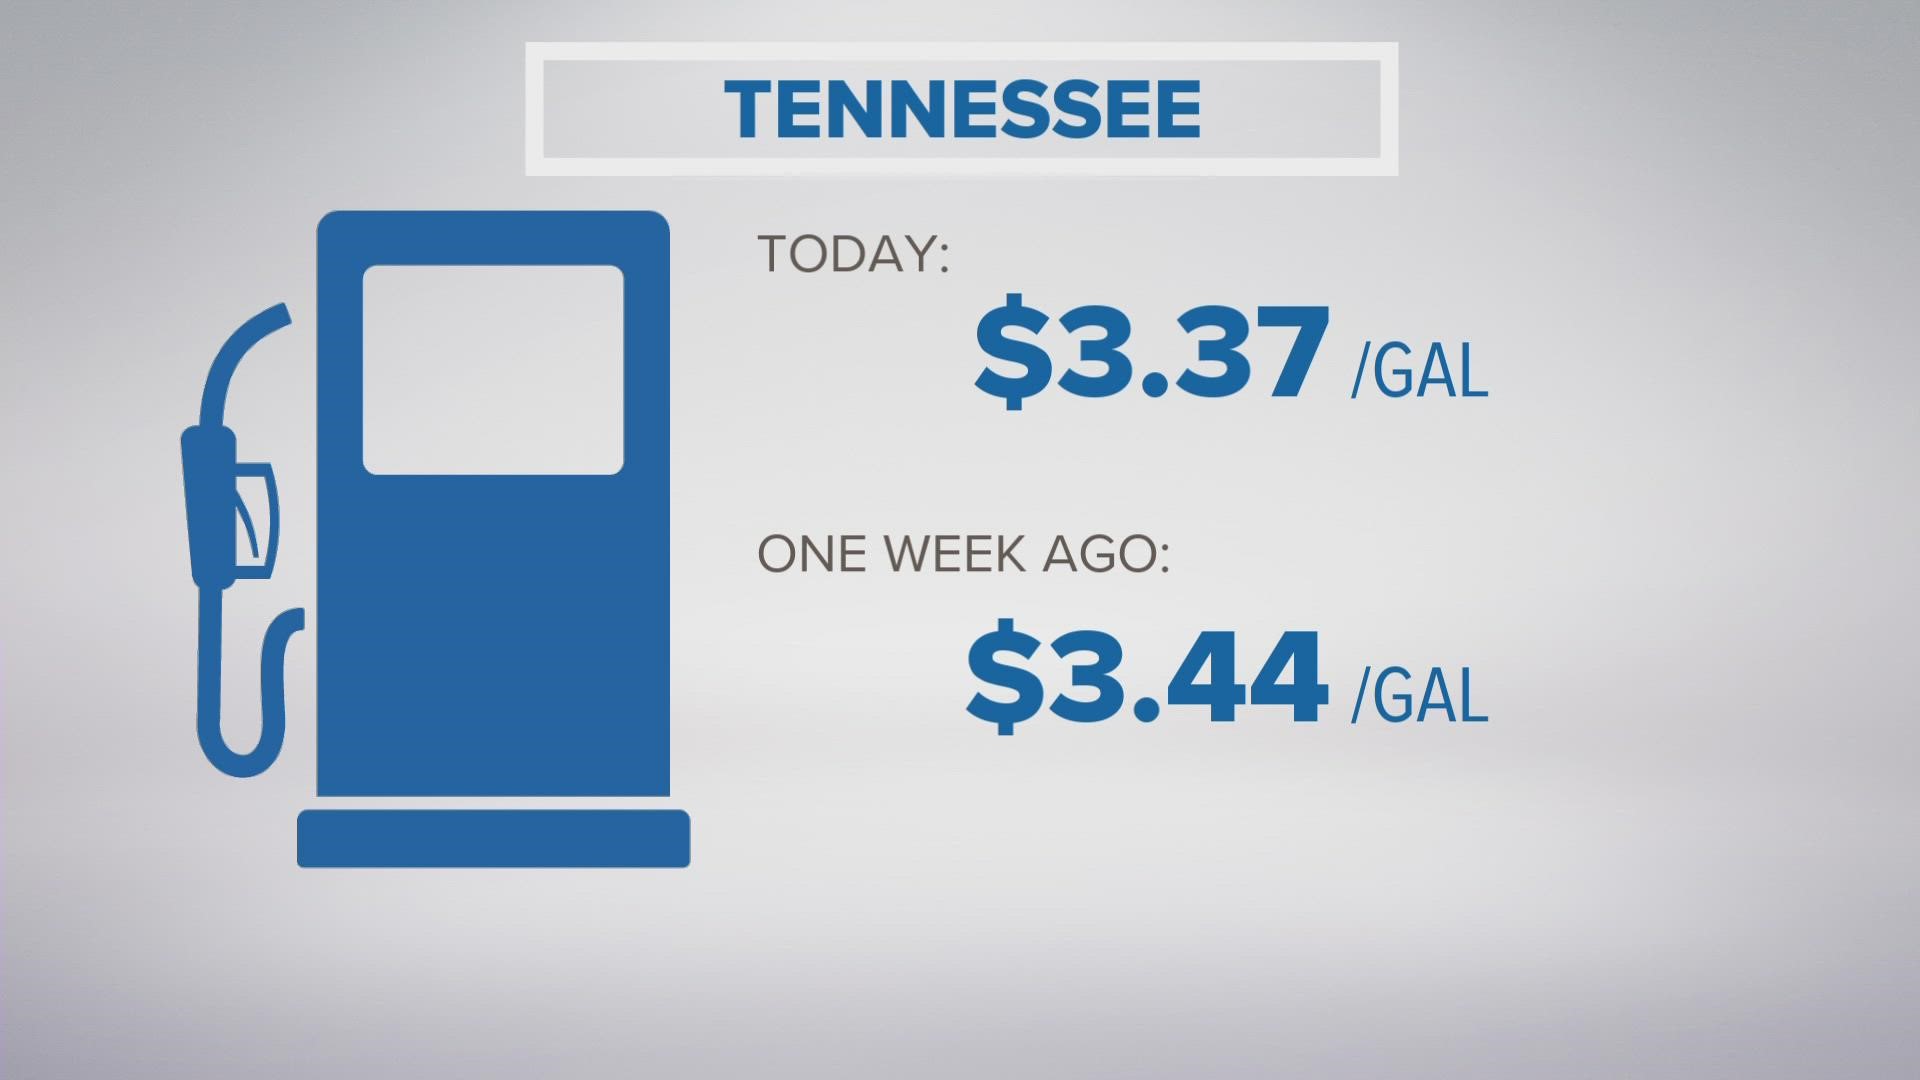 On Labor Day 2021, people were able to buy gas for around $2.91 per gallon in Tennessee. Now, it costs around $3.37 per gallon.